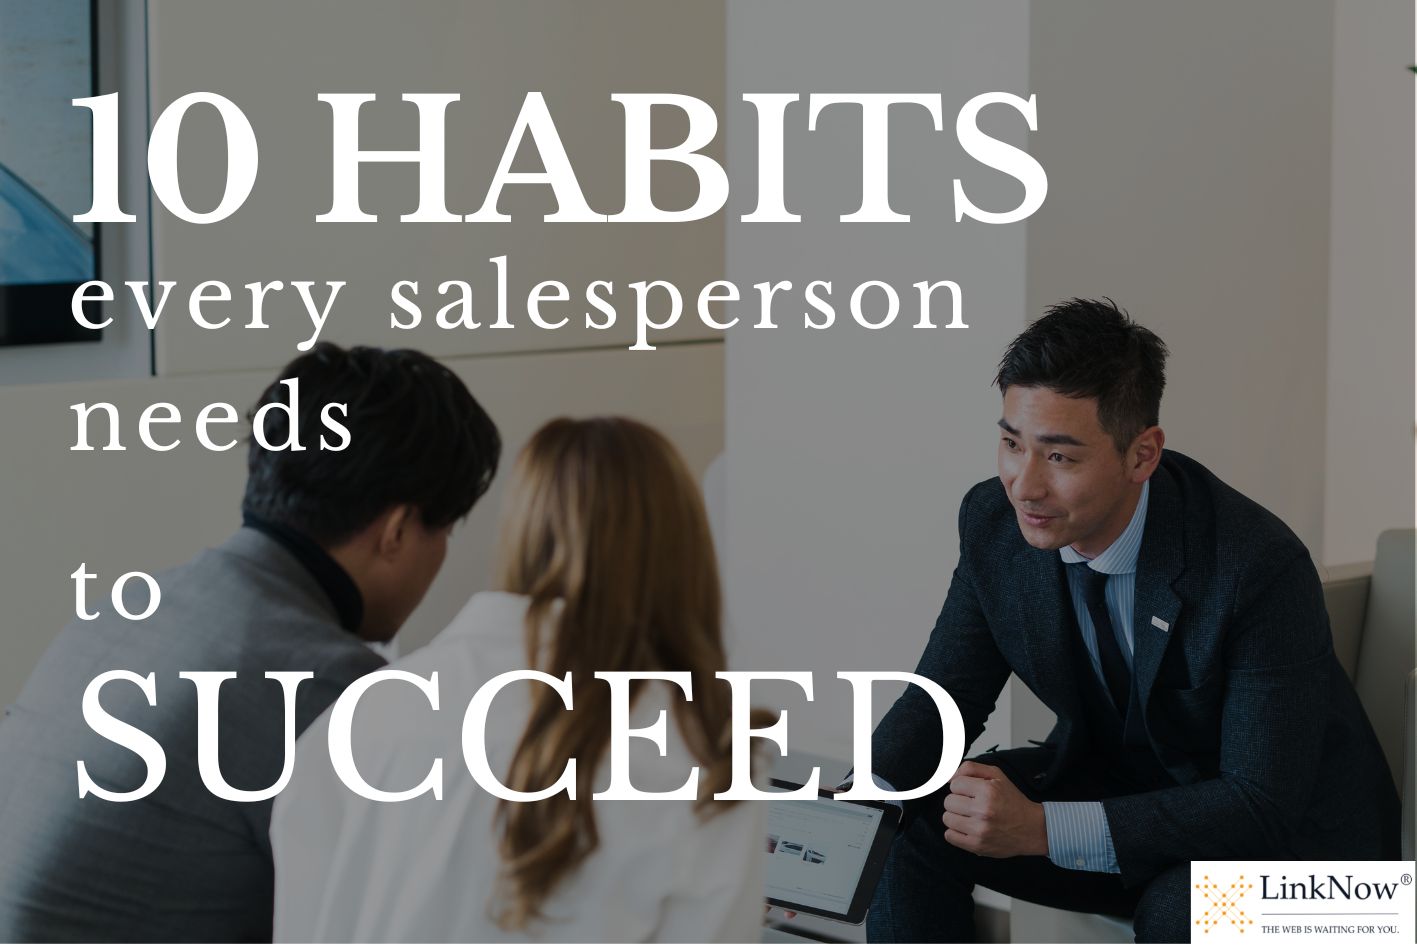 A salesperson listens to two prospective customers. Caption says: 10 habits every salesperson needs to succeed.